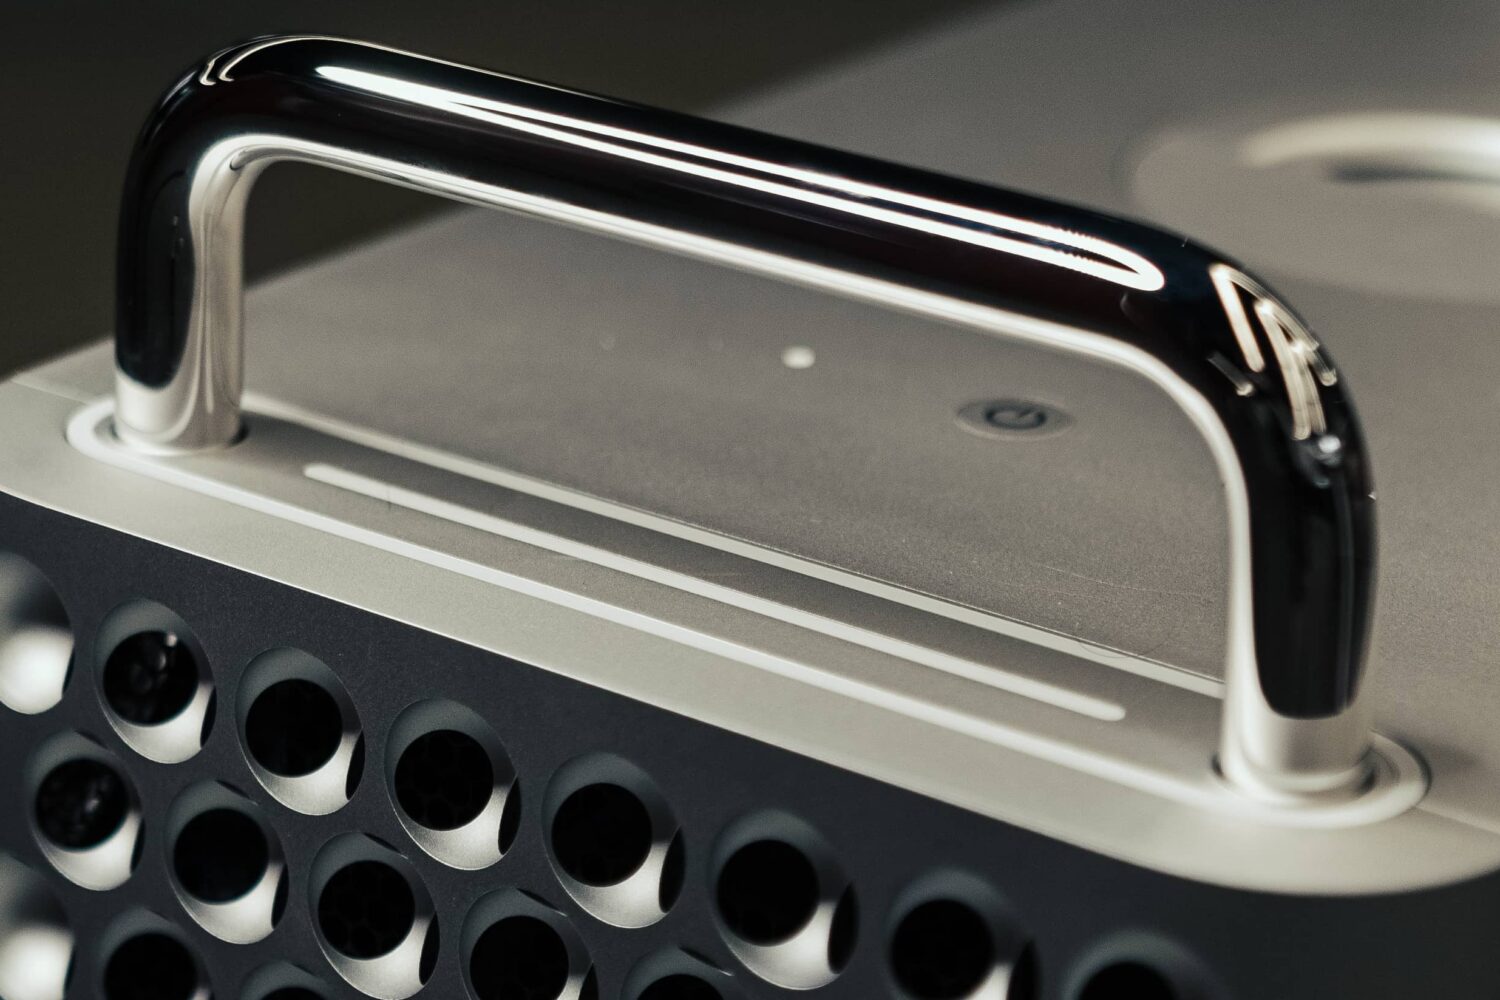 Closeup of the top handle of the 2019 Intel-based Mac Pro workstation